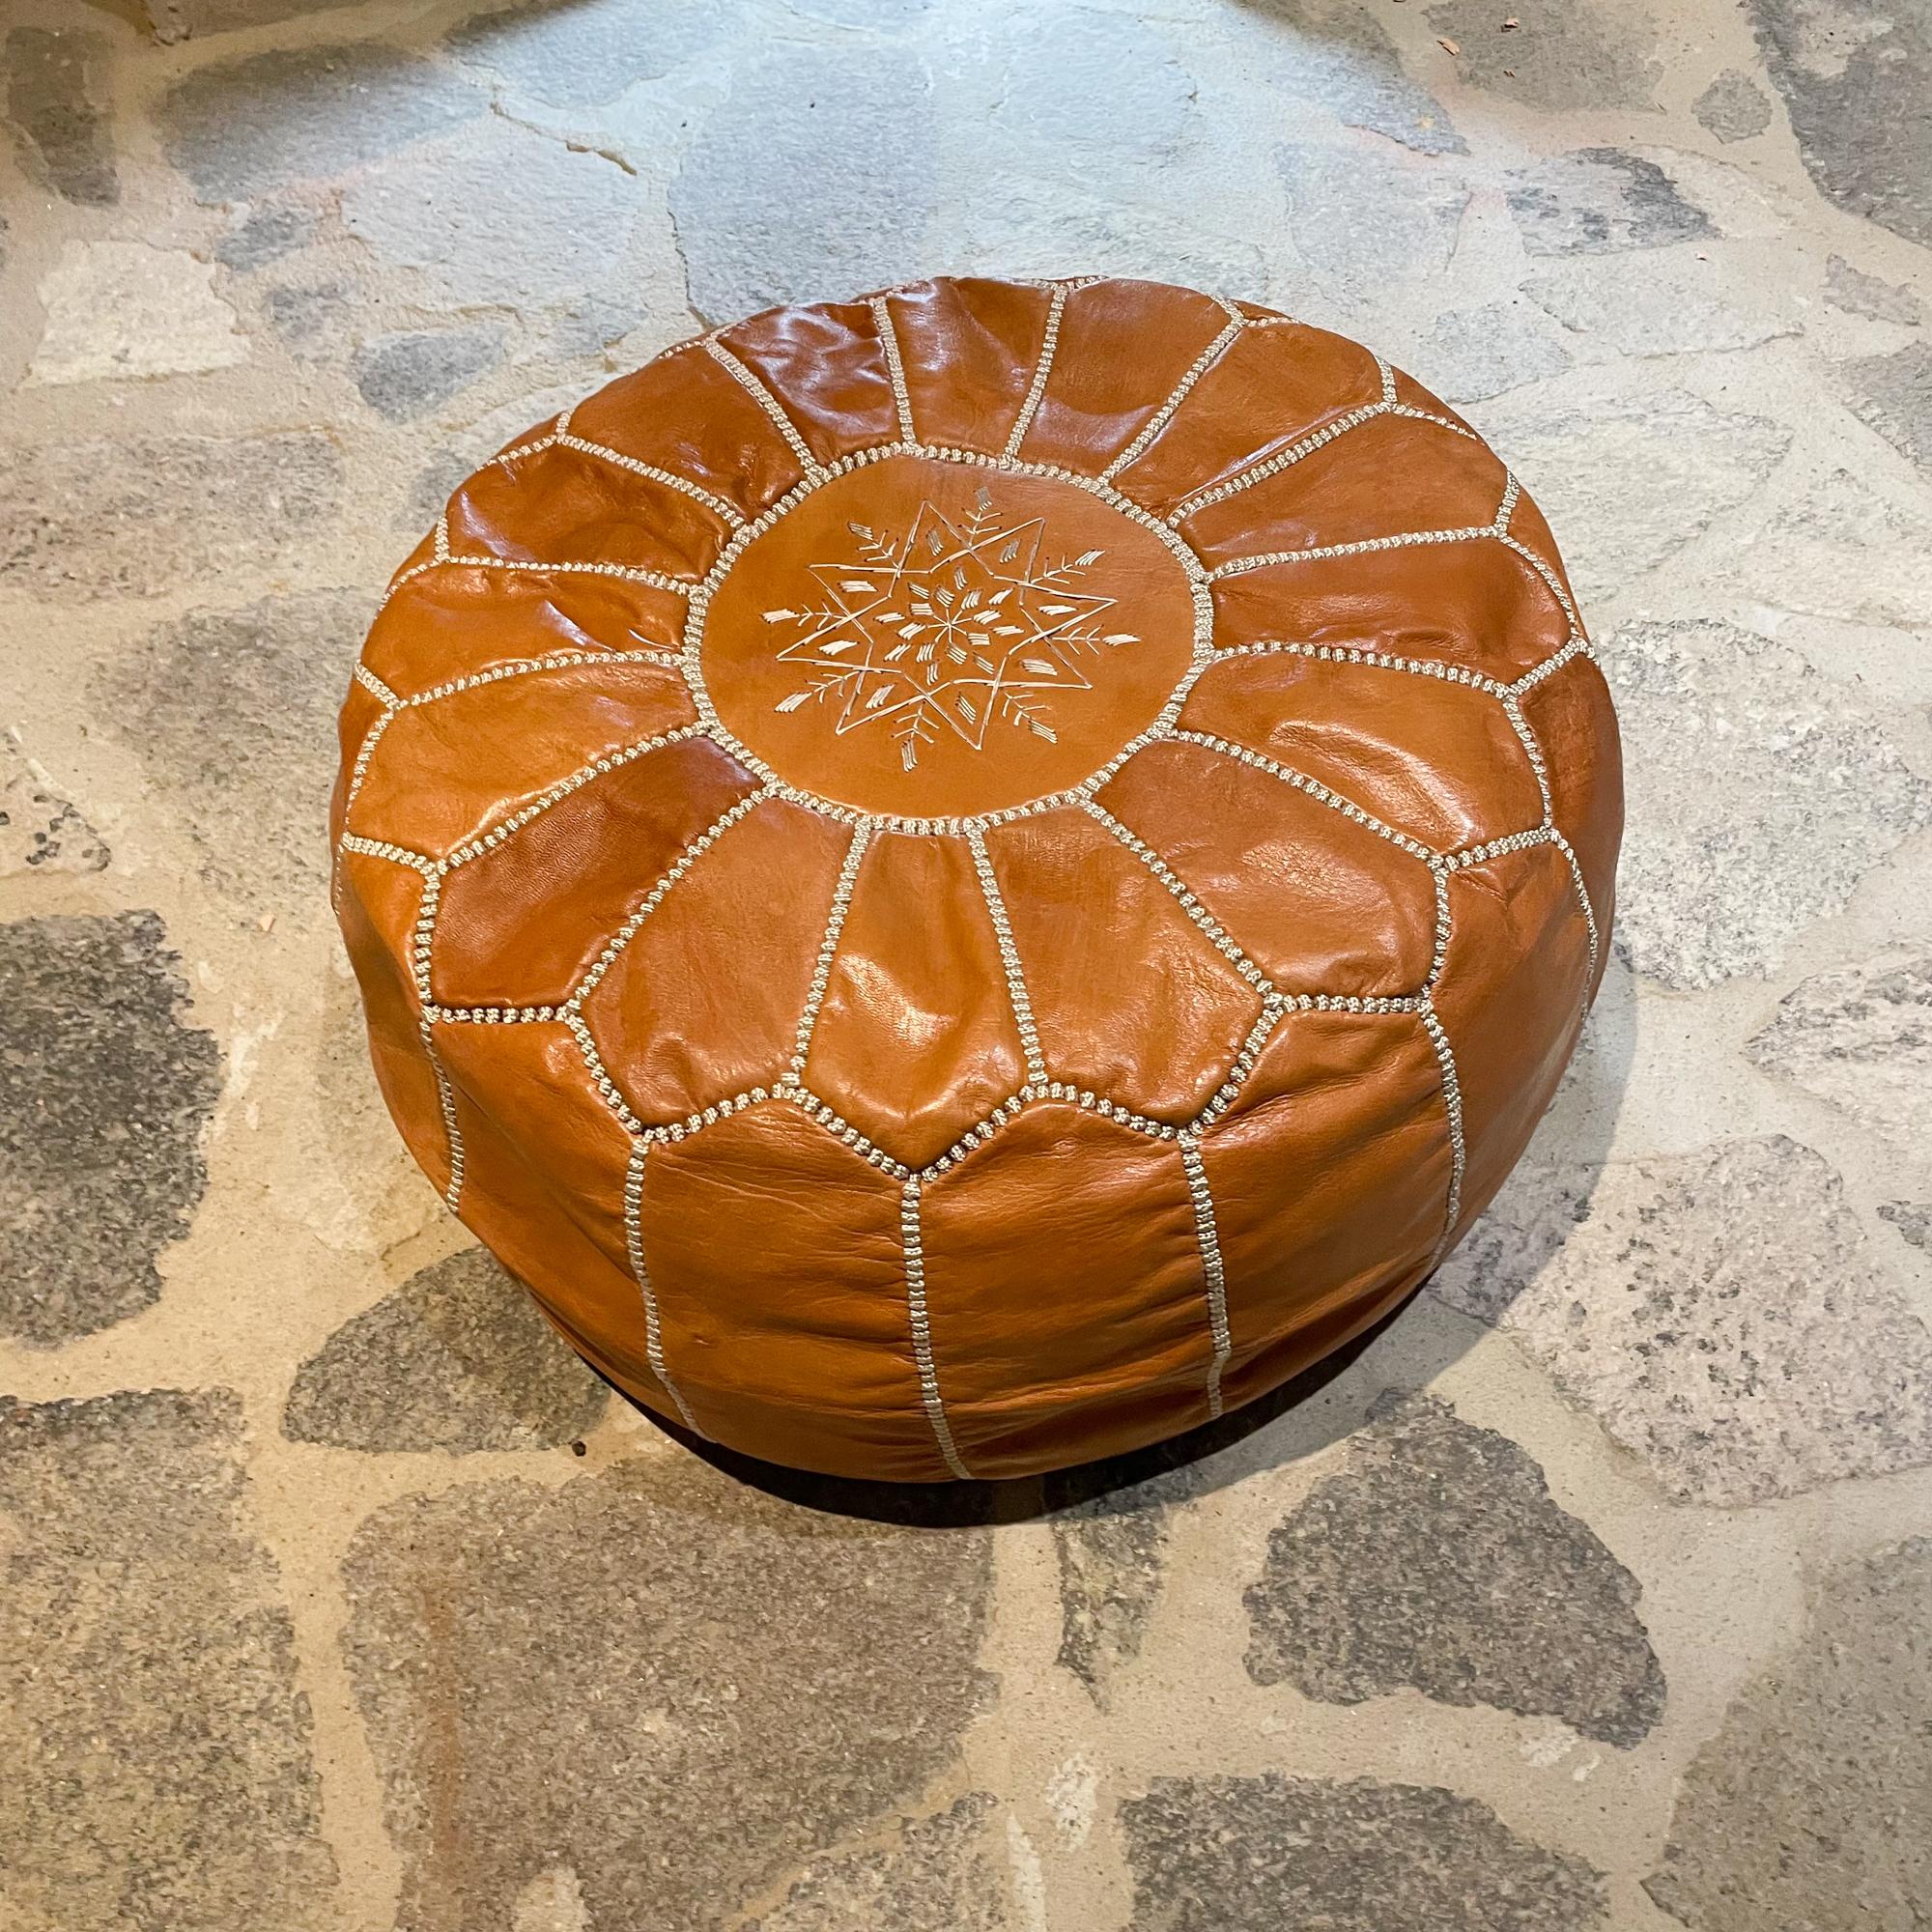 We presents: Radiant moroccan hand tooled saddle leather low stool round pouf ottoman with intricate stitch embroidery detail.
Features Zippered cover. Unmarked.
In the style of Berber Tribes of Morocco
Measures: 10 height x 21.5 inches